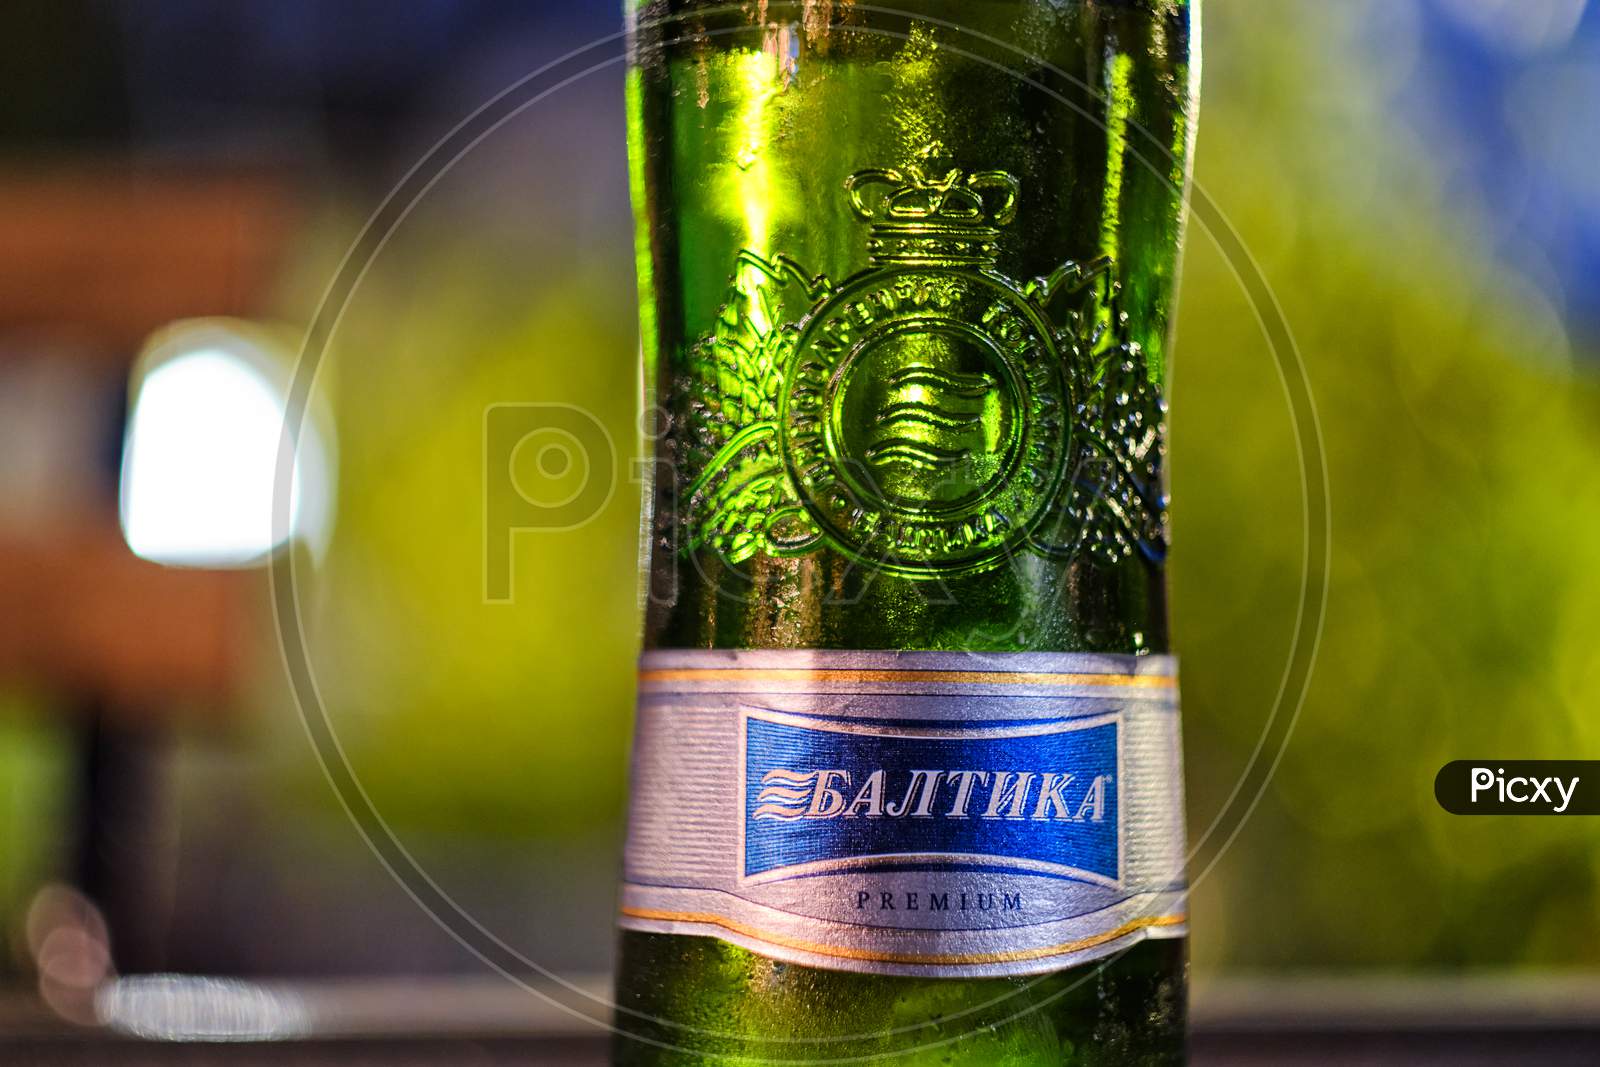 Bottle Of Cold Baltika 7 Premium Russian Beer Served In A Bar